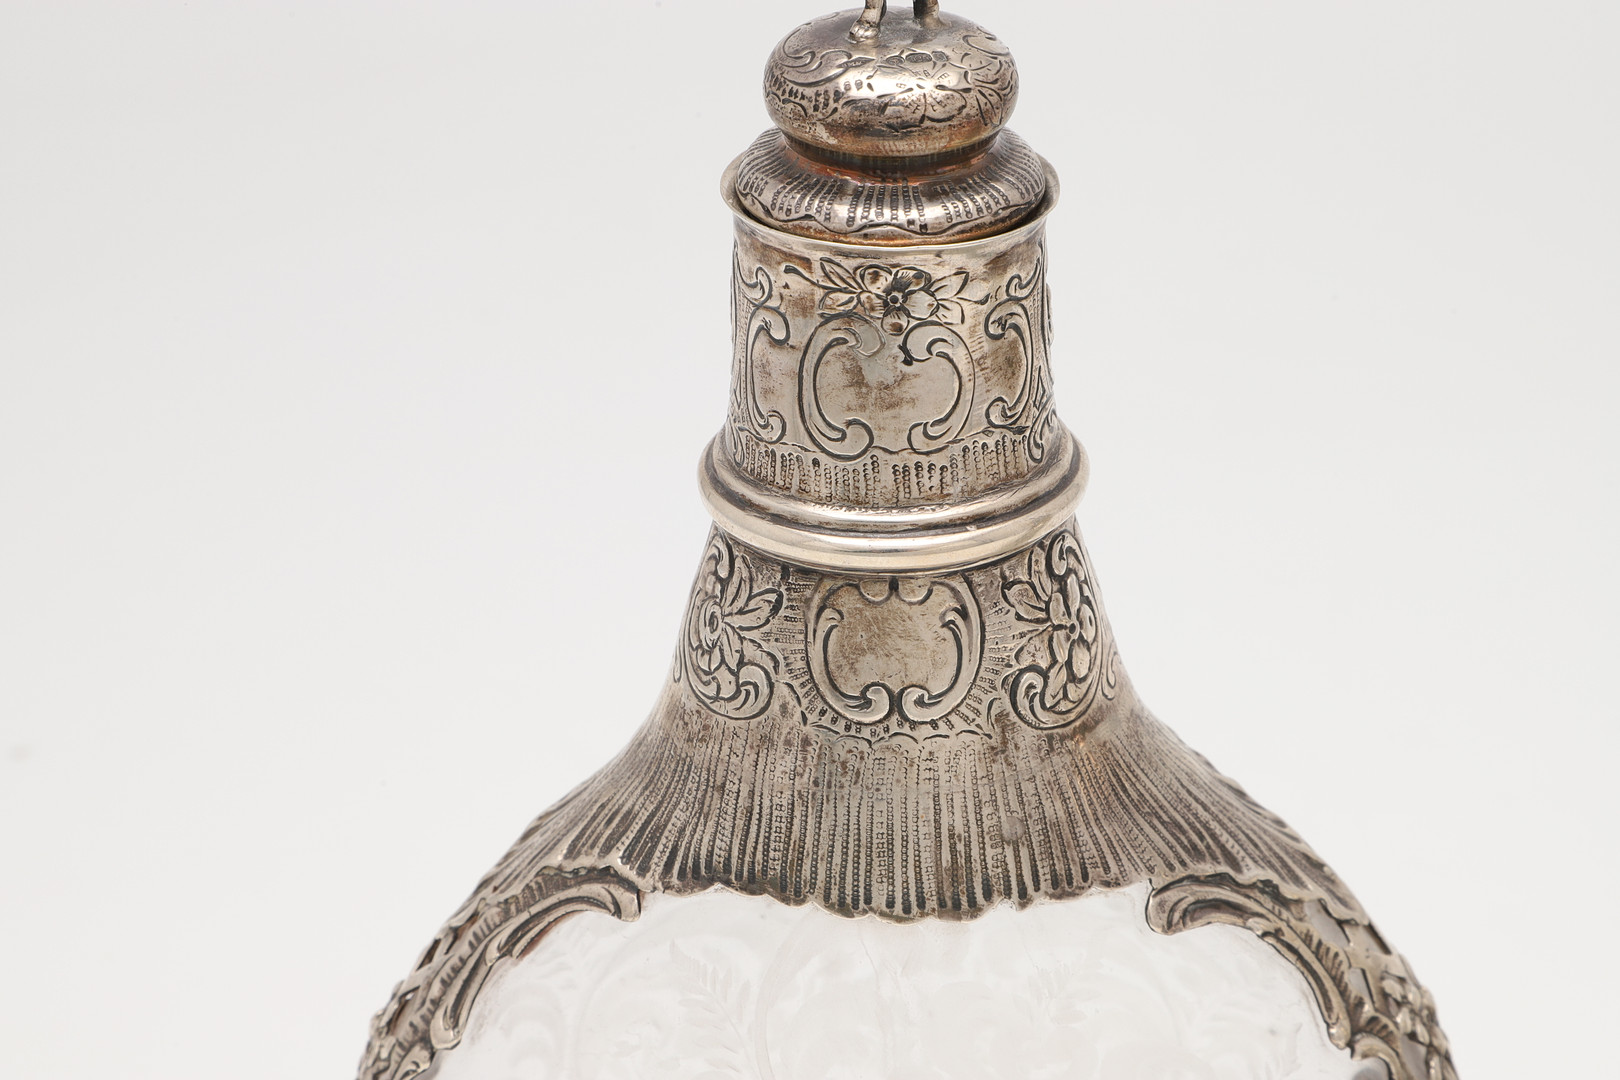 A PAIR OF LATE 19TH/ EARLY 20TH CENTURY GERMAN SILVER MOUNTED DECANTERS. - Image 4 of 13